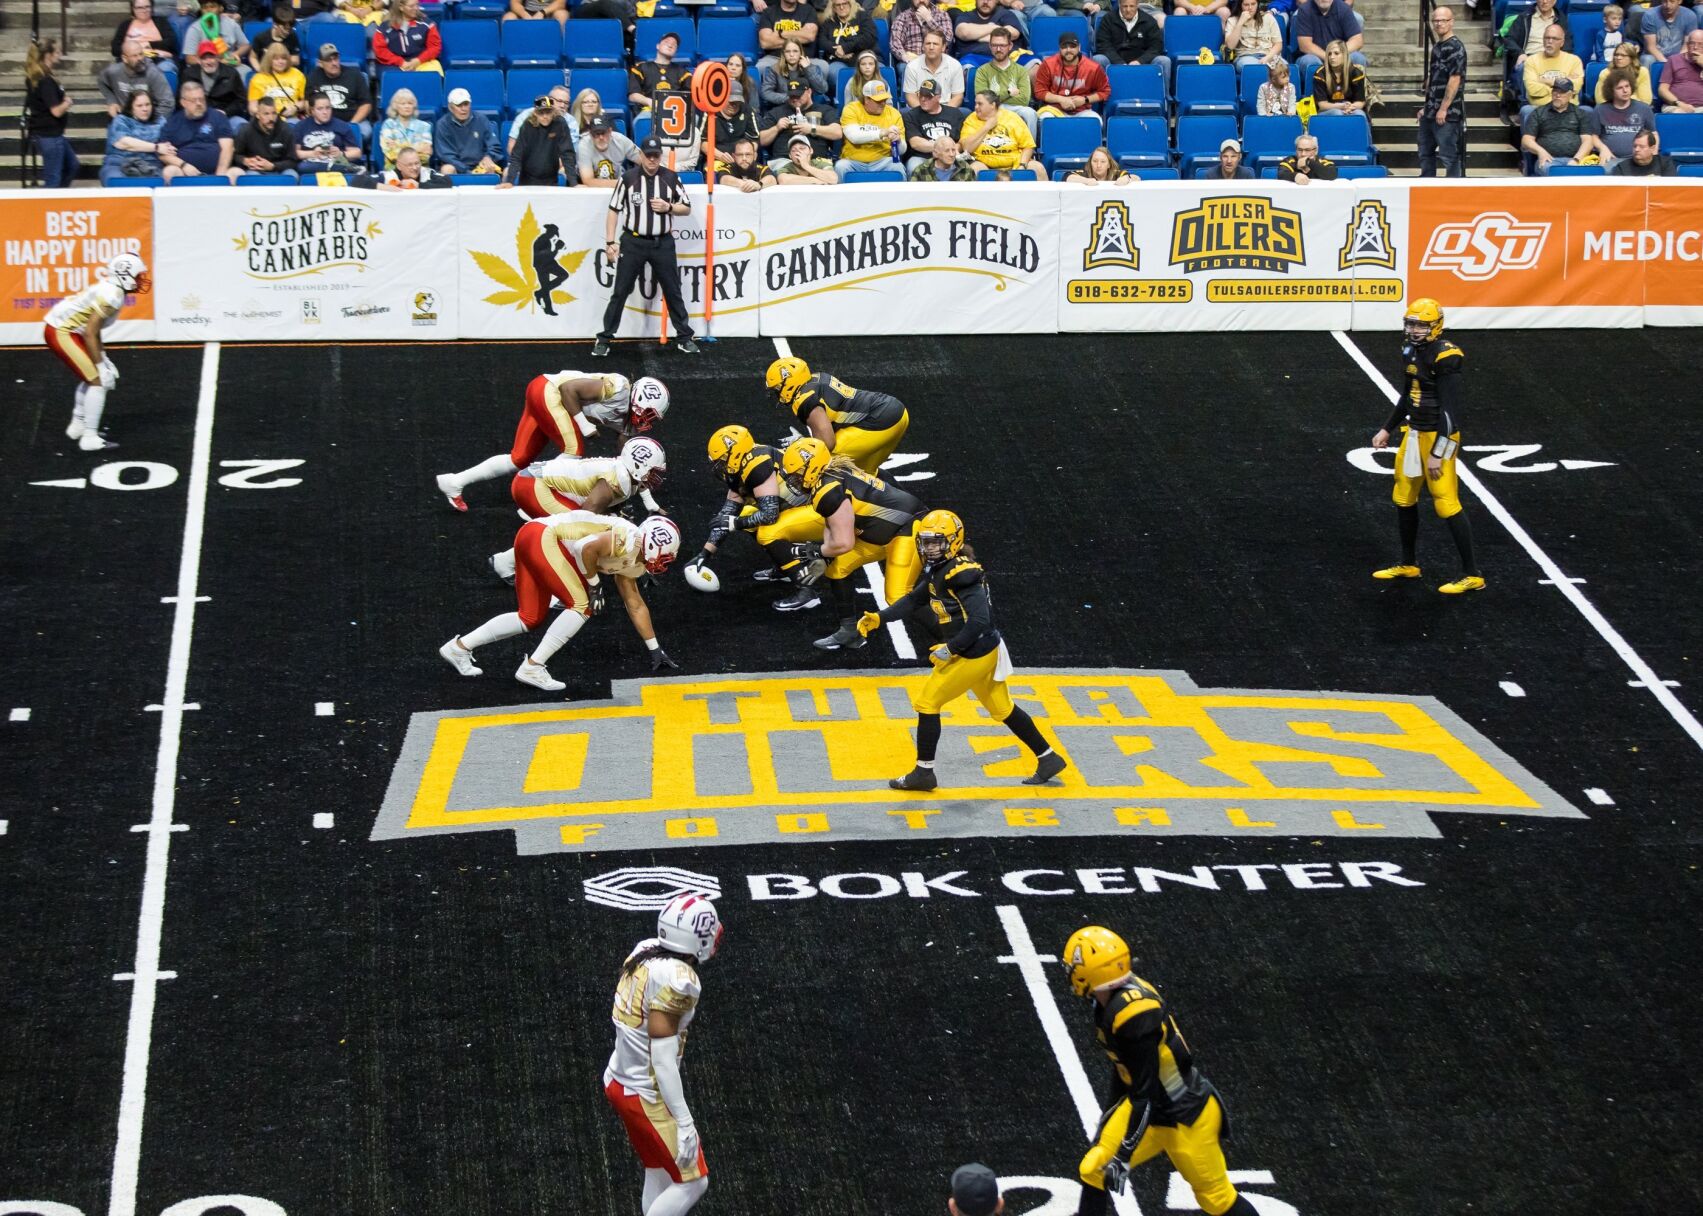 Indoor Football League championship games to be aired on CBS Sports Network